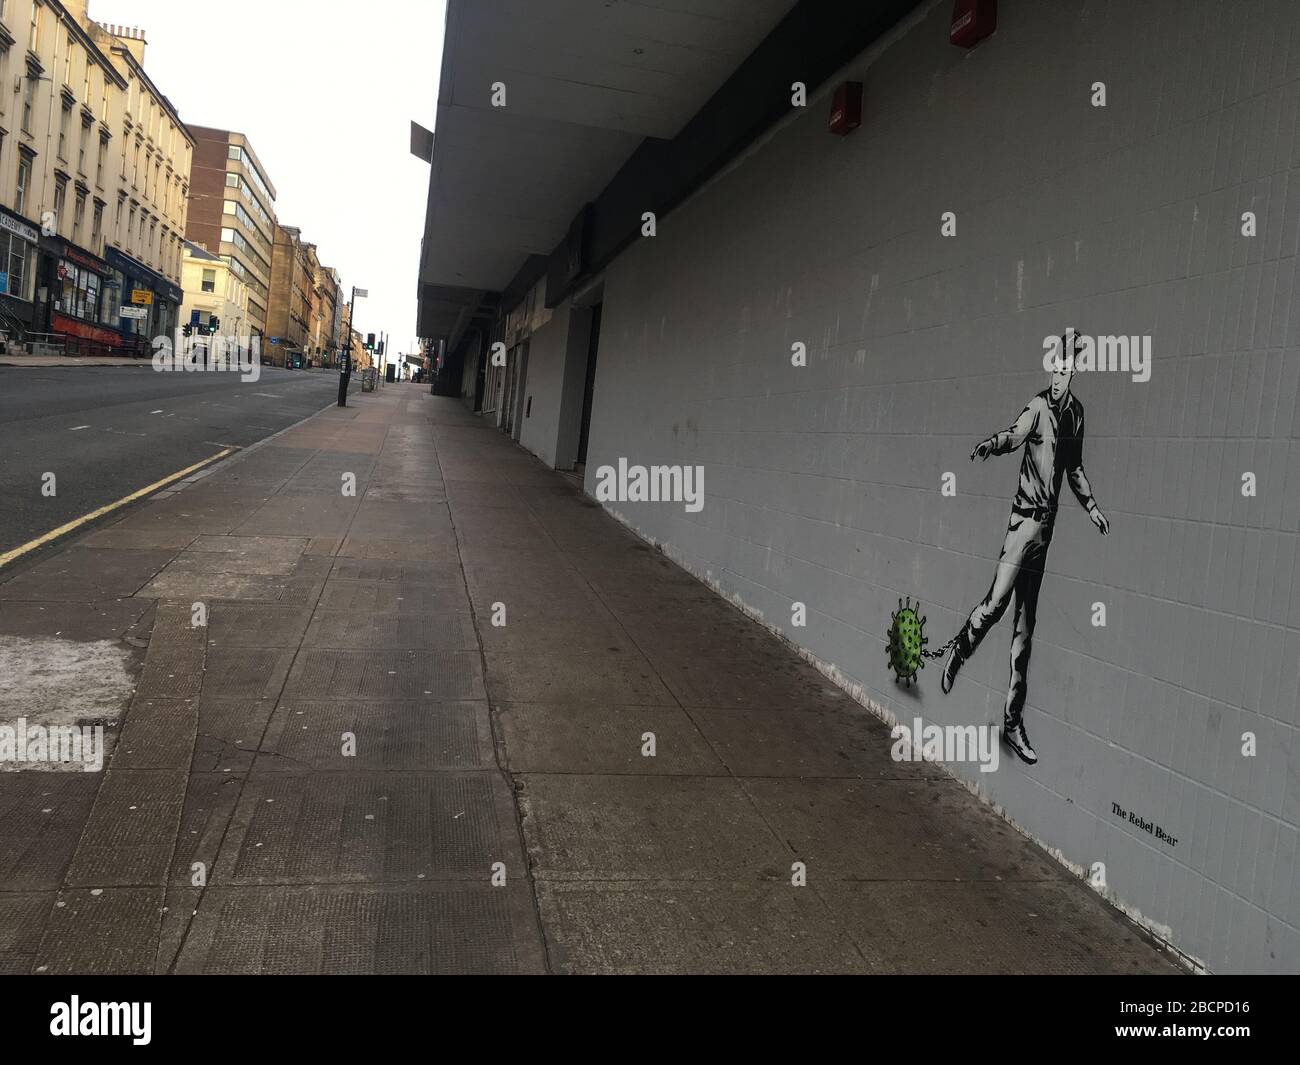 Glasgow, UK. 5th Apr, 2020. A new mural by the street artist The Rebel Bear depicting a man chained to a virus molecule, in empty streets in the city centre, illustrating that social distancing guidelines and 'stay at home' advisories are being adhered to in the time of Coronavirus COVID-19 pandemic crisis. Photo Credit: jeremy sutton-hibbert/Alamy Live News Stock Photo